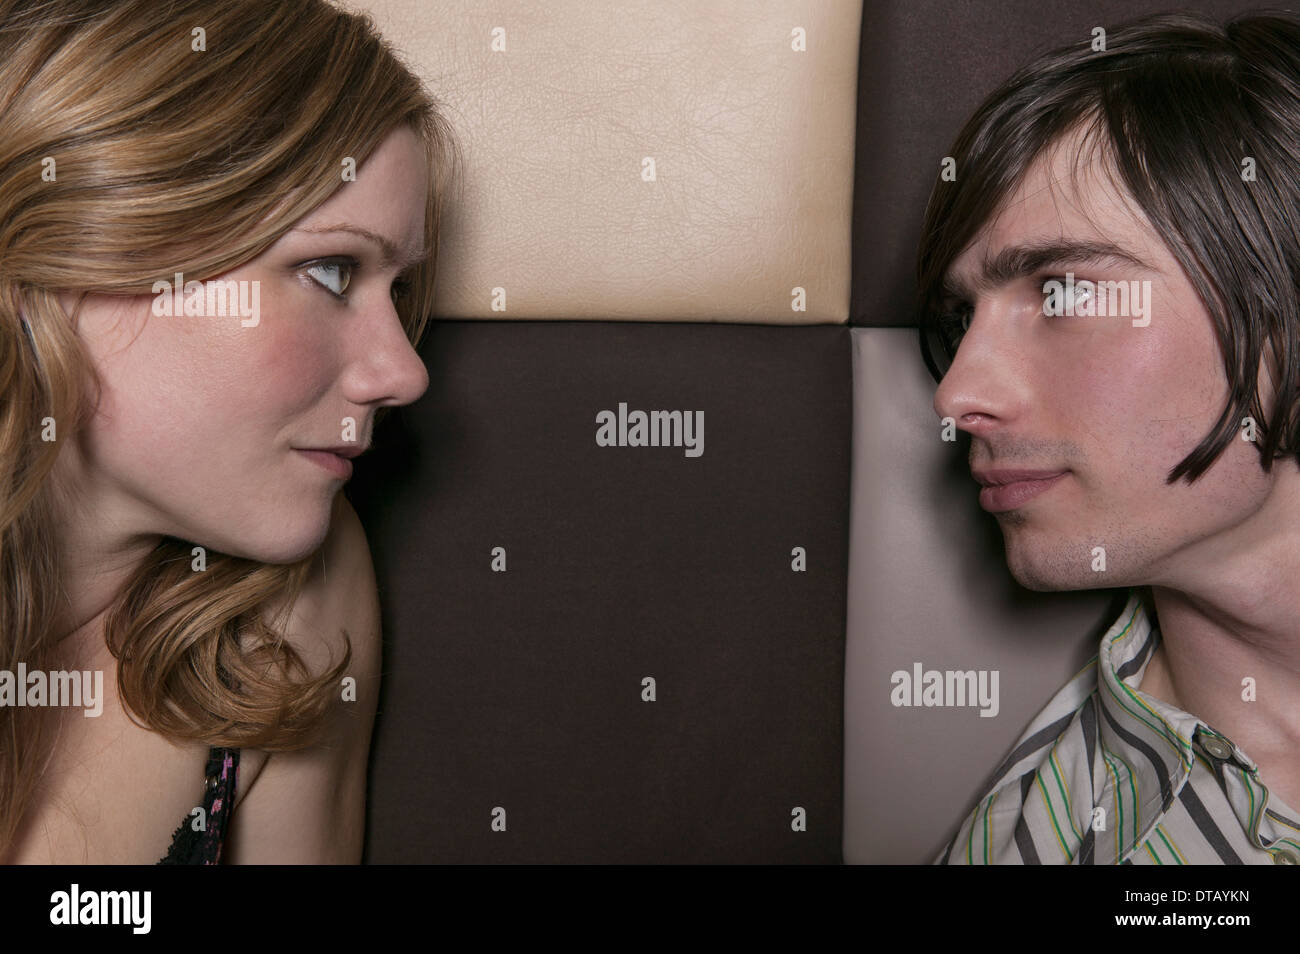 A couple looking at each other intensely, close-up Stock Photo